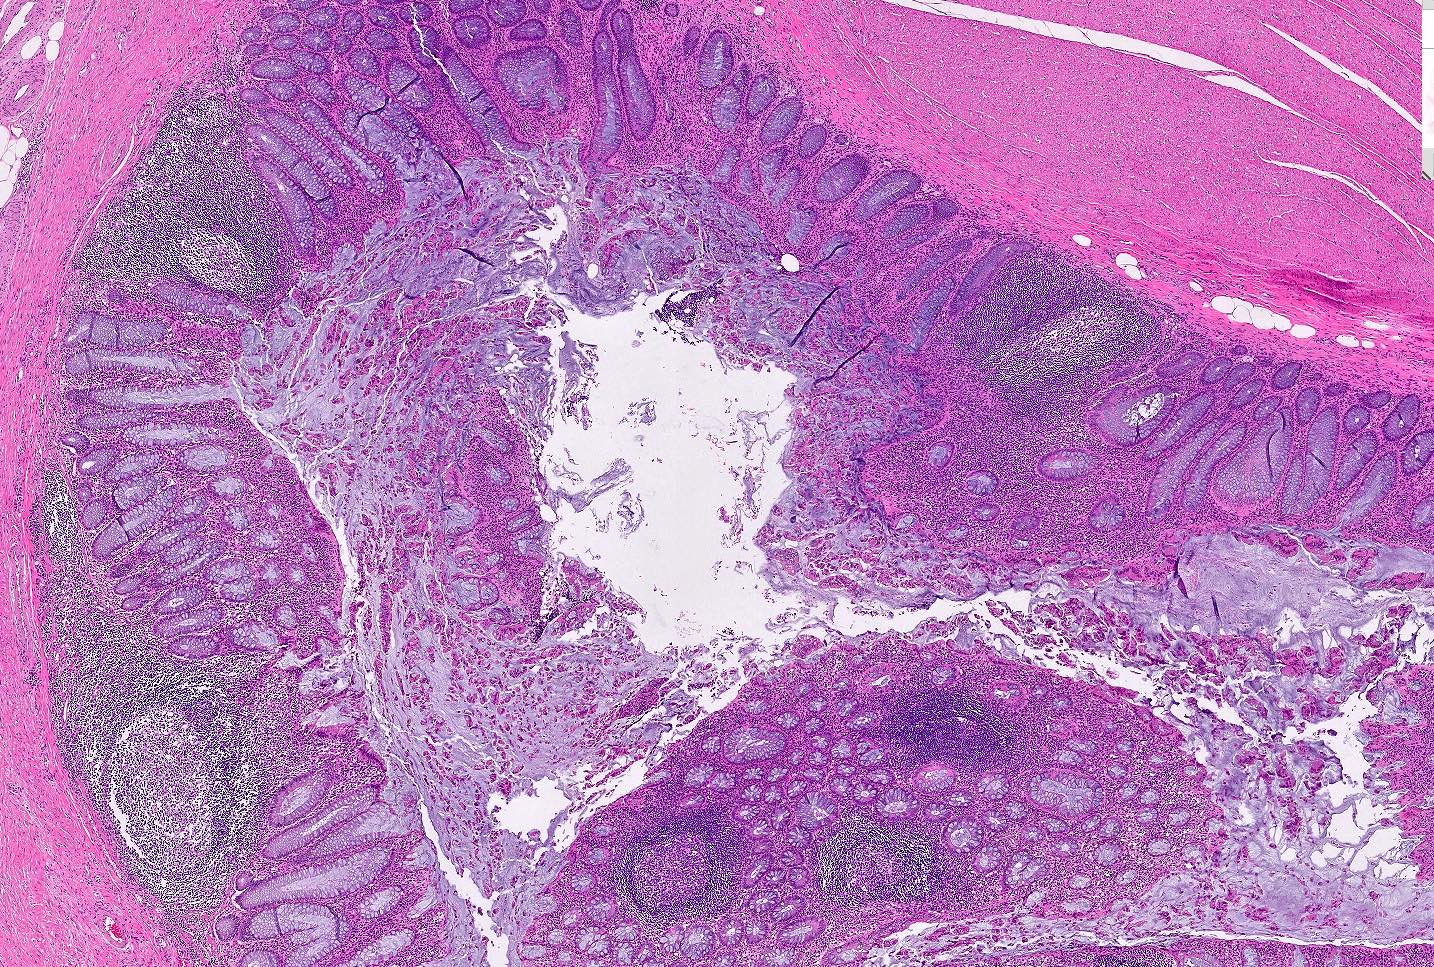 Lymphoid aggregates in diverticular wall